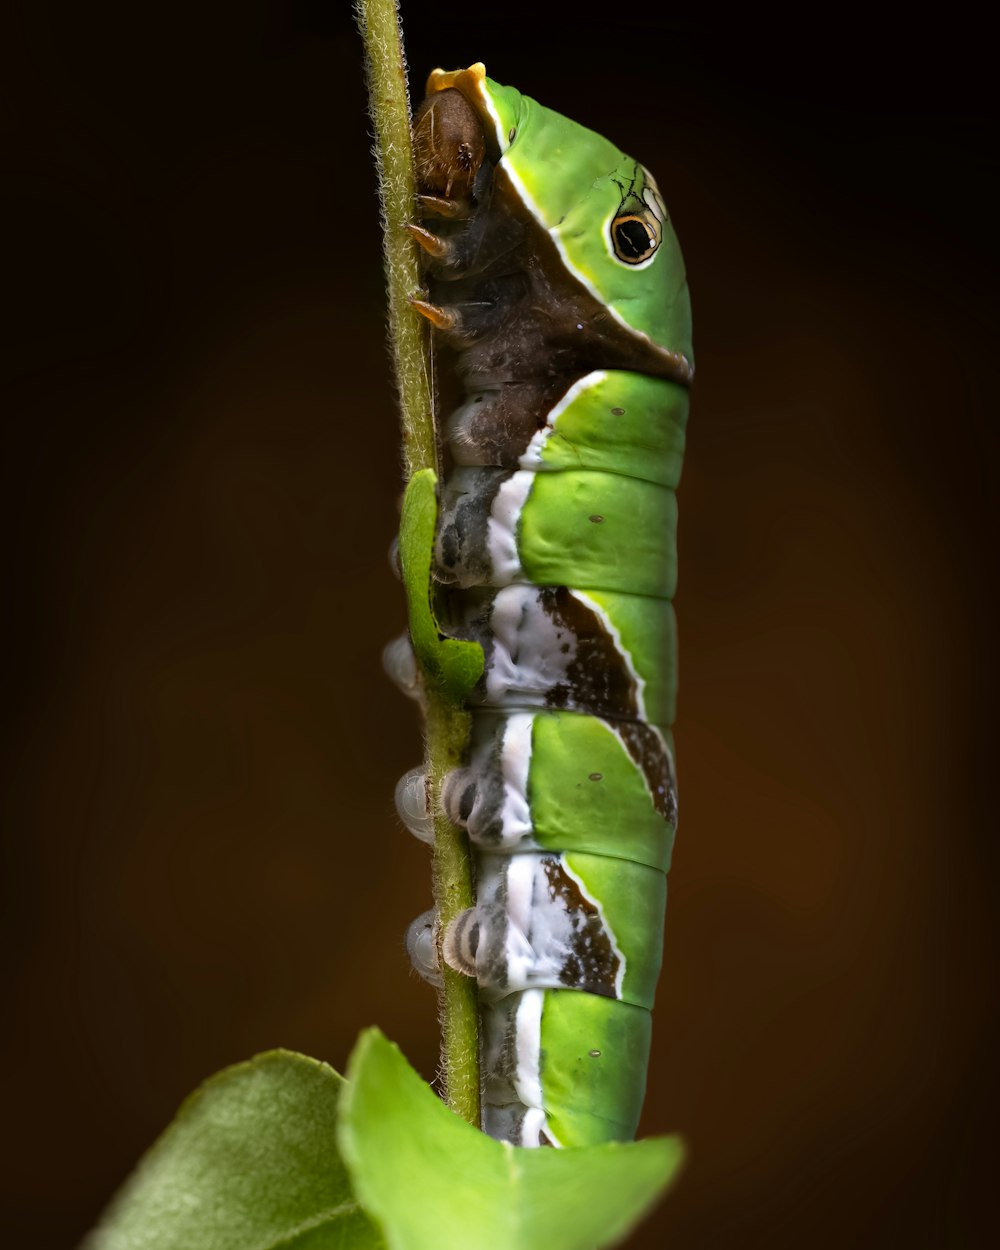 a green and white caterpillar crawling on a plant